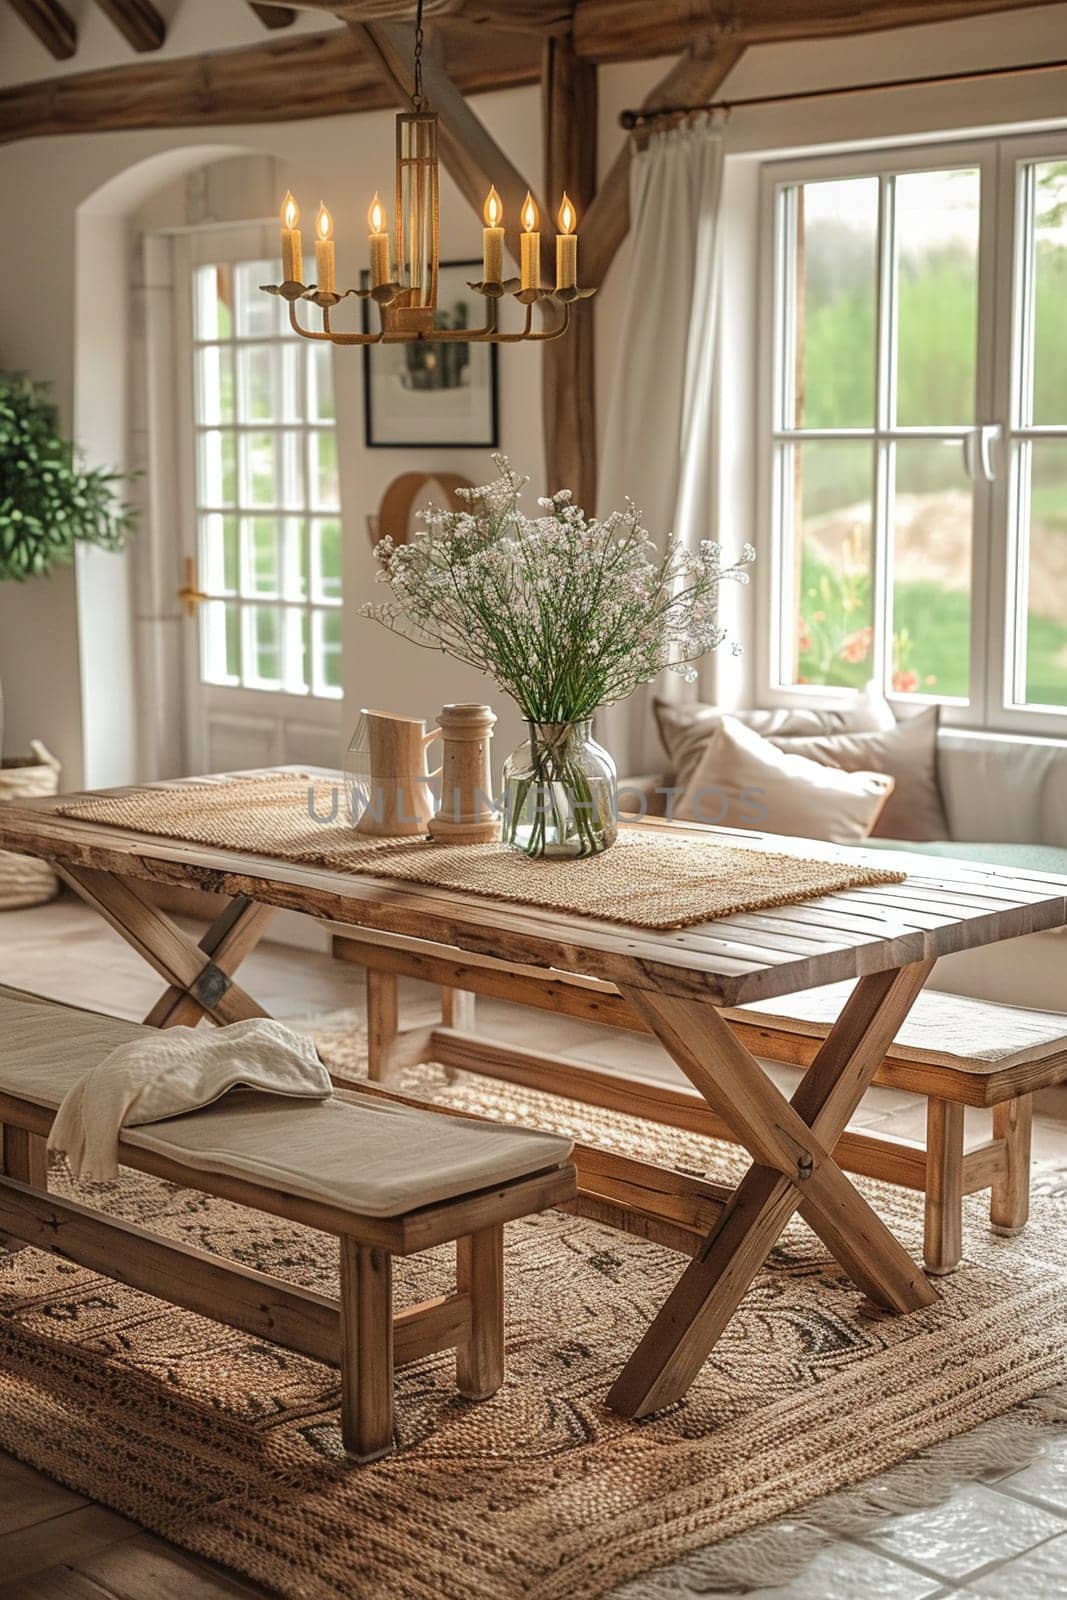 Warm and inviting dining room with a rustic farmhouse table and candle chandelier3D render.